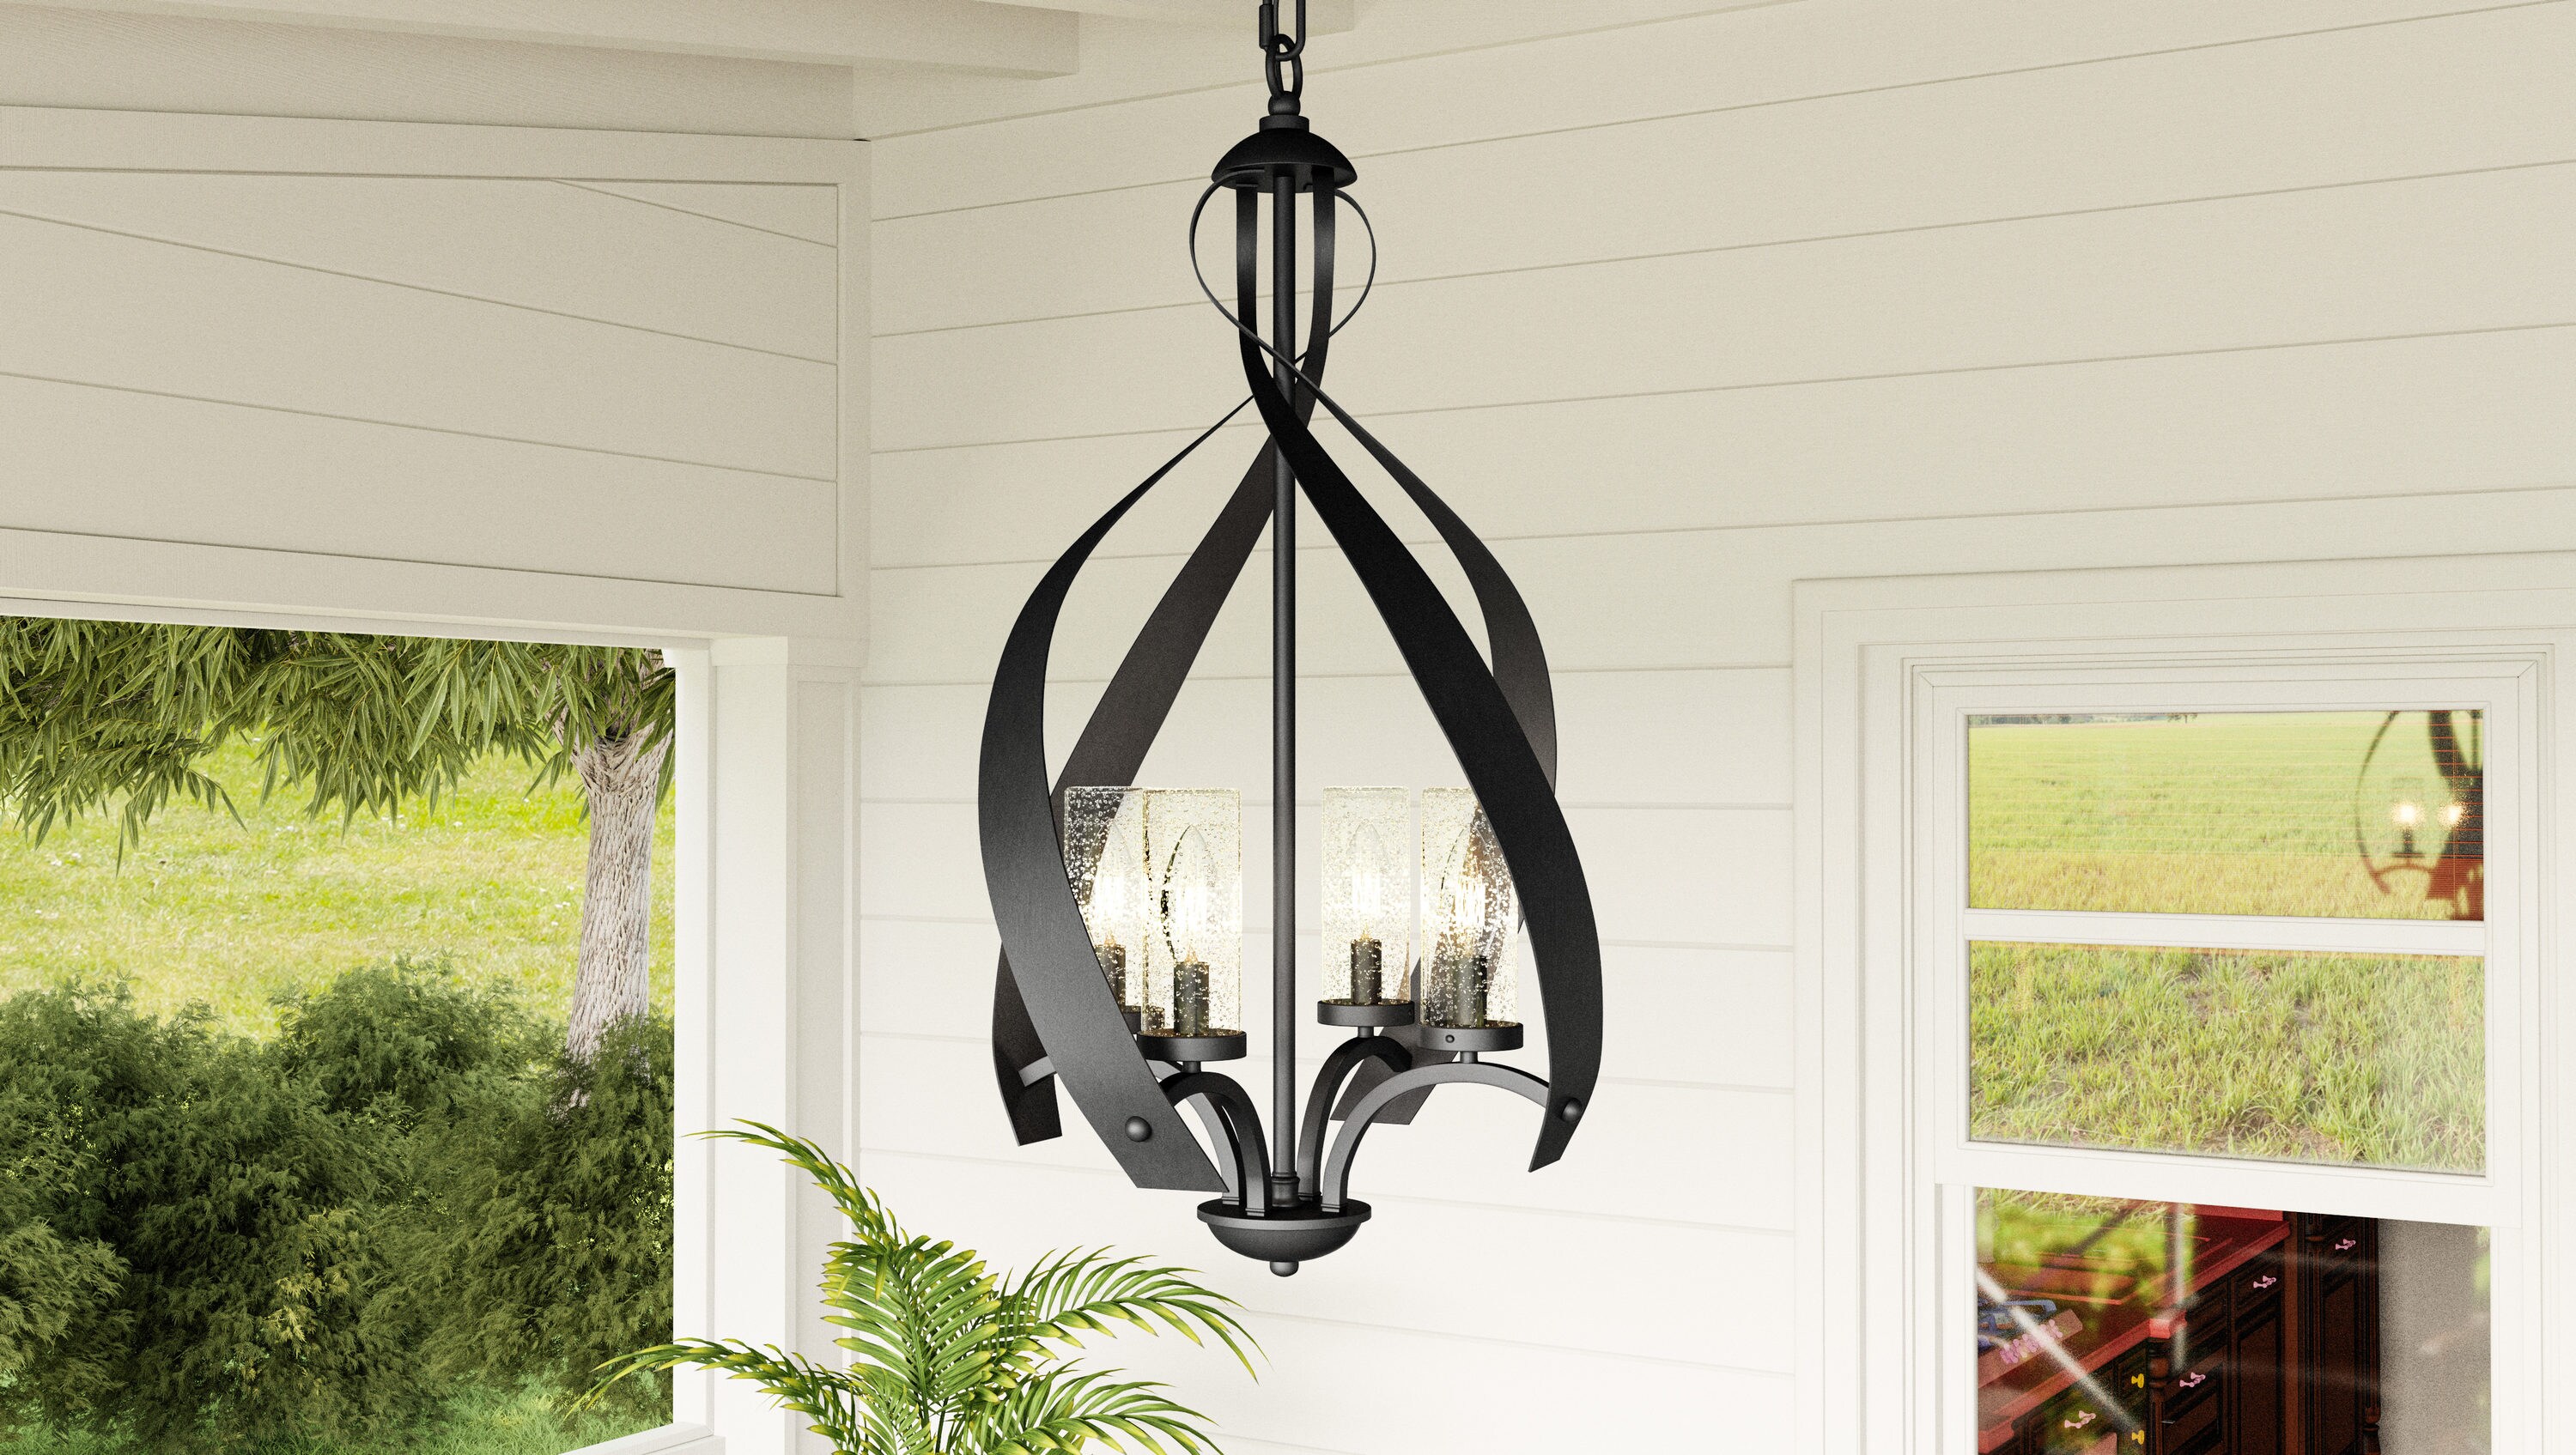 Lighting Transitional Light Lars Quoizel Hanging department Pendant in Outdoor at Clear Geometric 4-Light the Glass Black Pendant